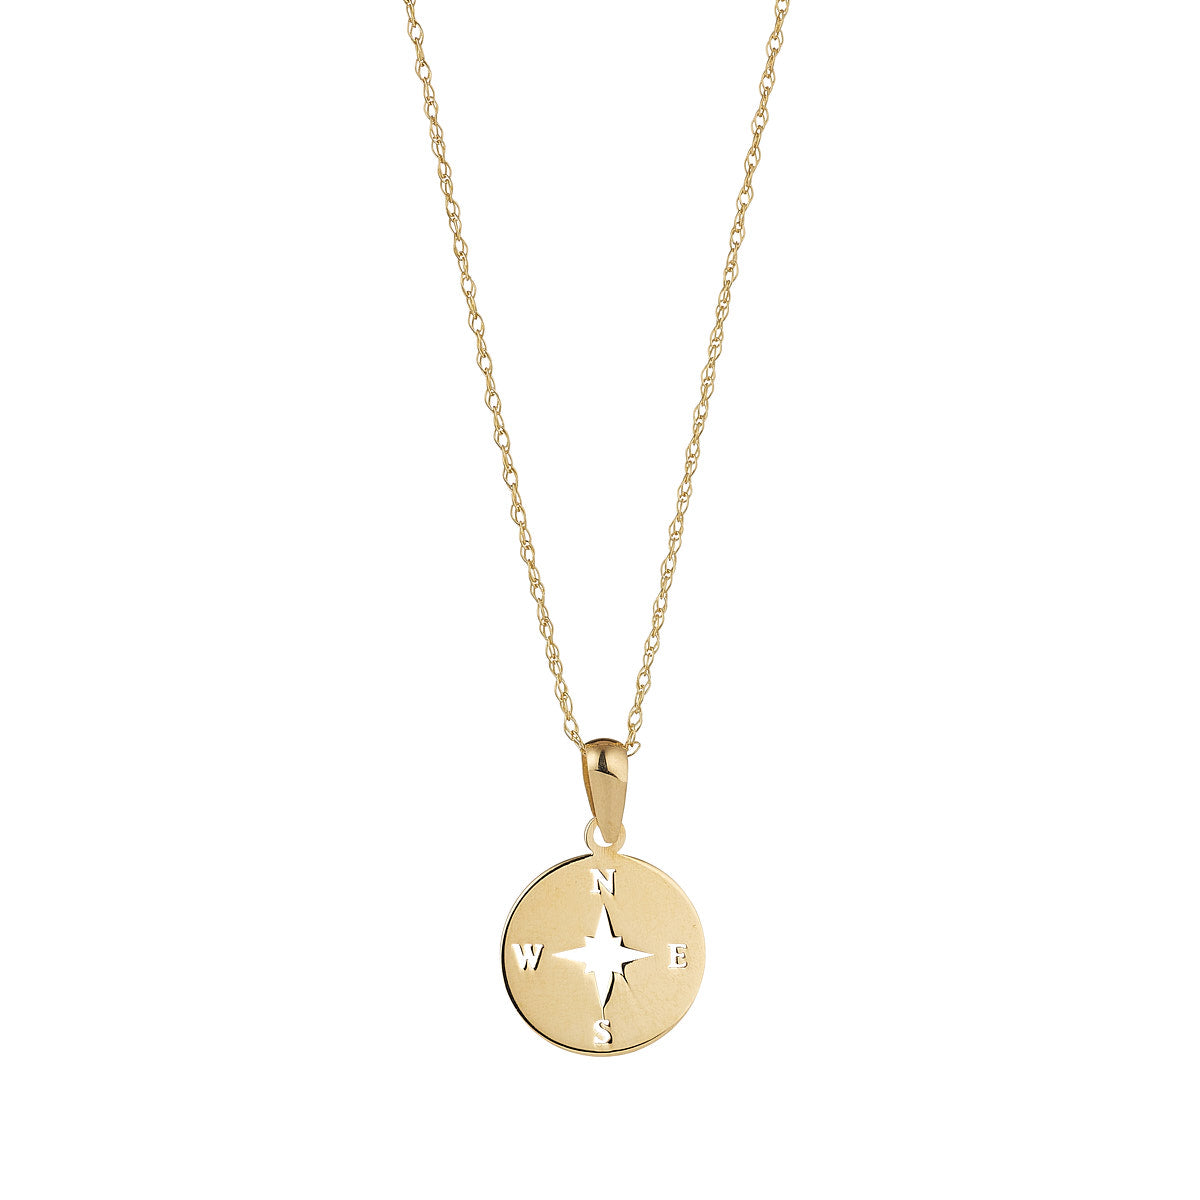 Discover the 9 carat yellow gold compass necklace, a symbol of direction and adventure. This elegant piece features a beautifully crafted compass design, perfect for adding a touch of wanderlust to your everyday style.